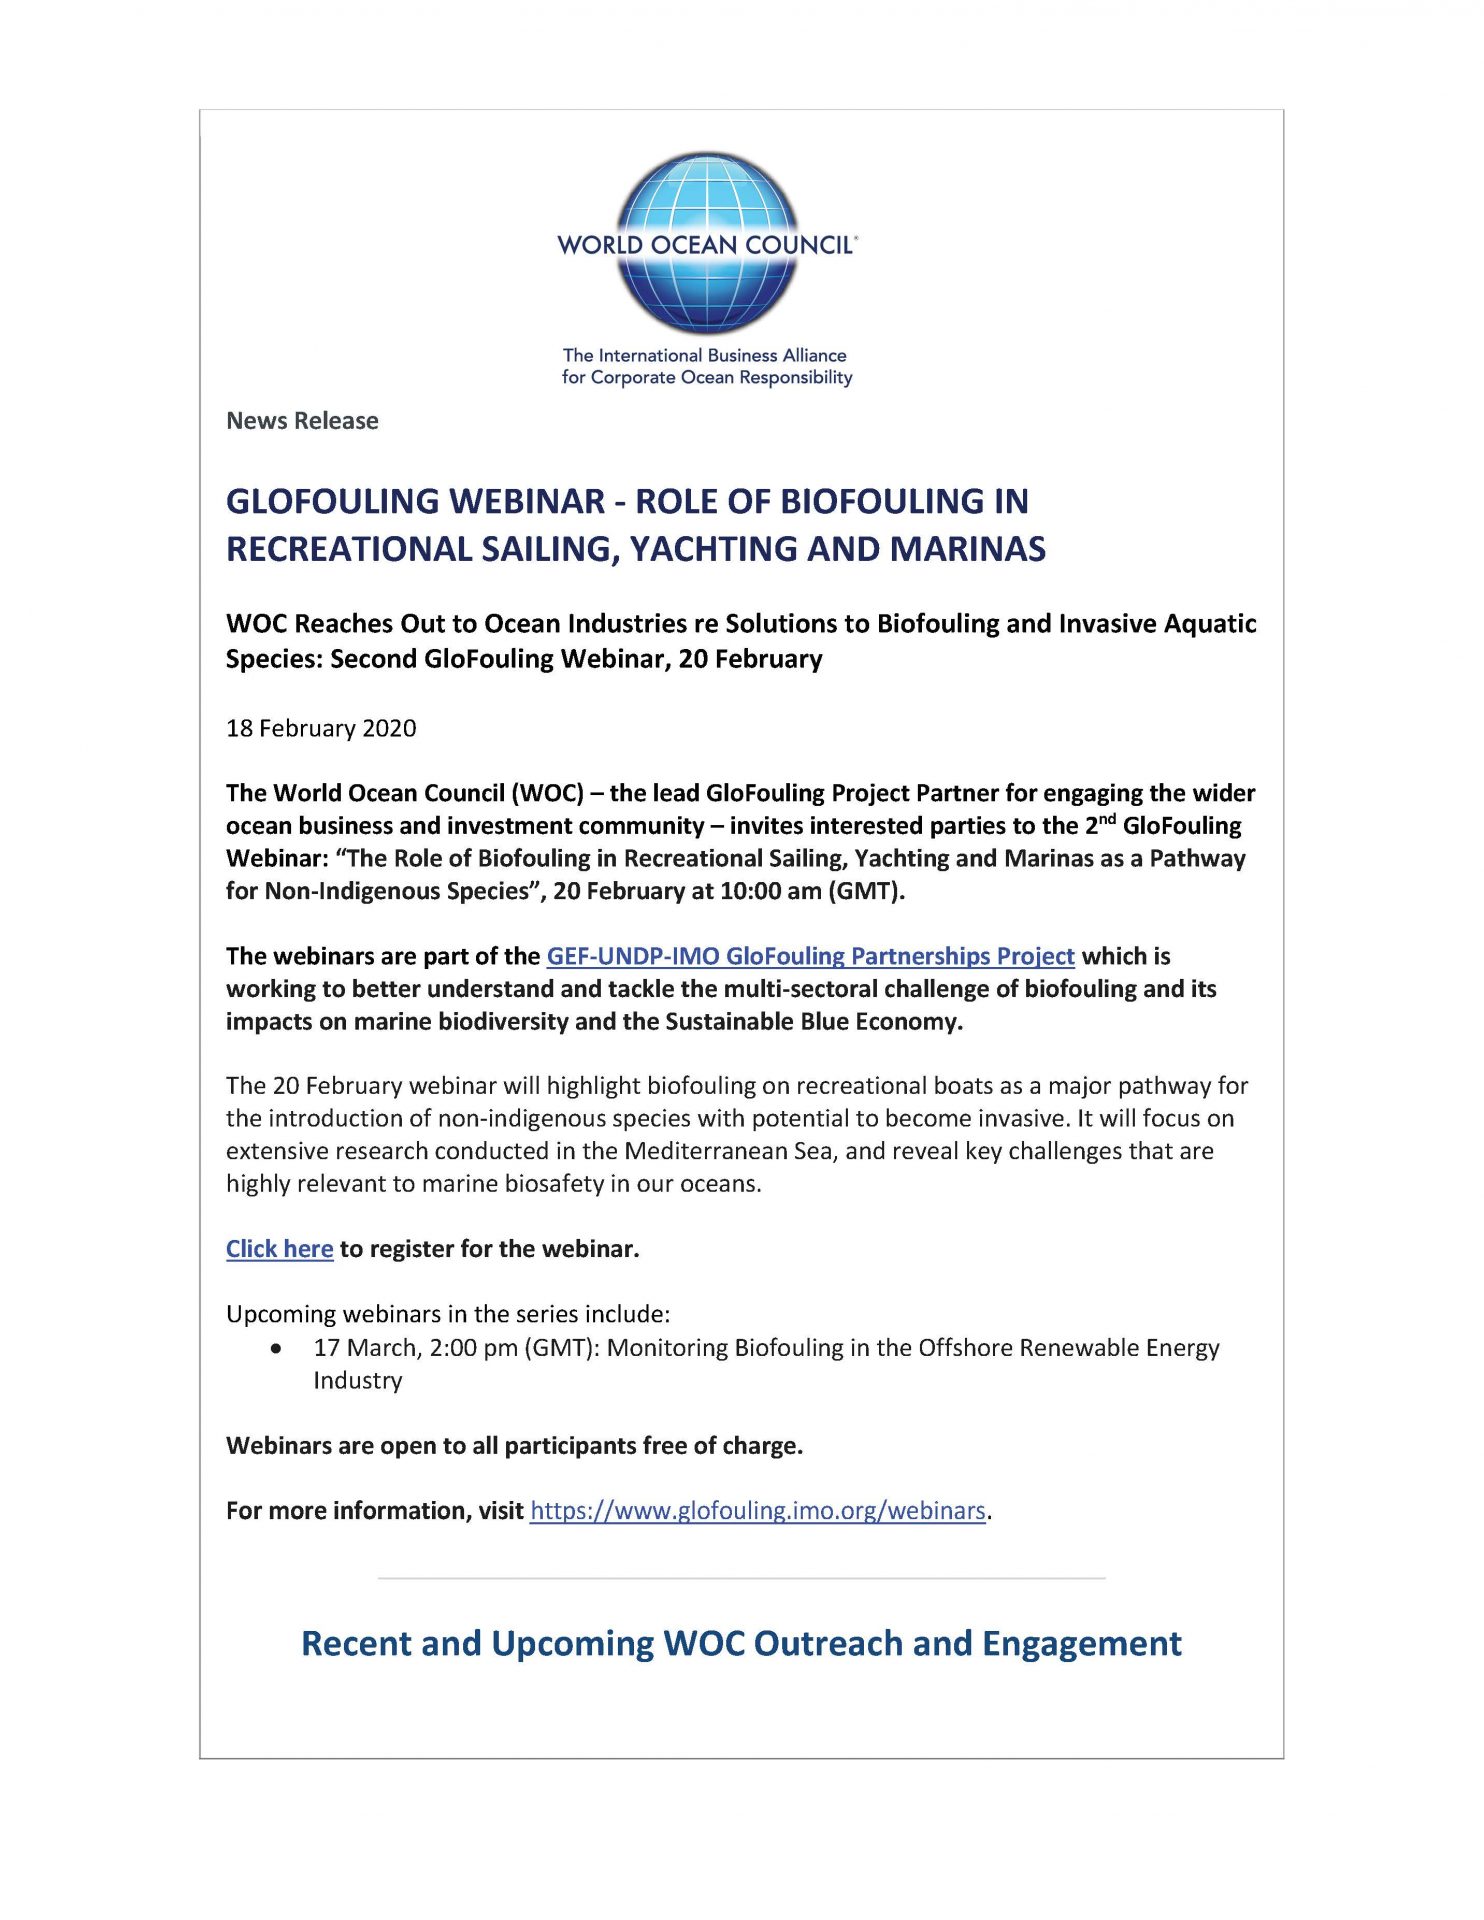 GloFouling Webinar - Role of Biofouling in Recreational Sailing, Yachting and Marinas - 18 February 2020